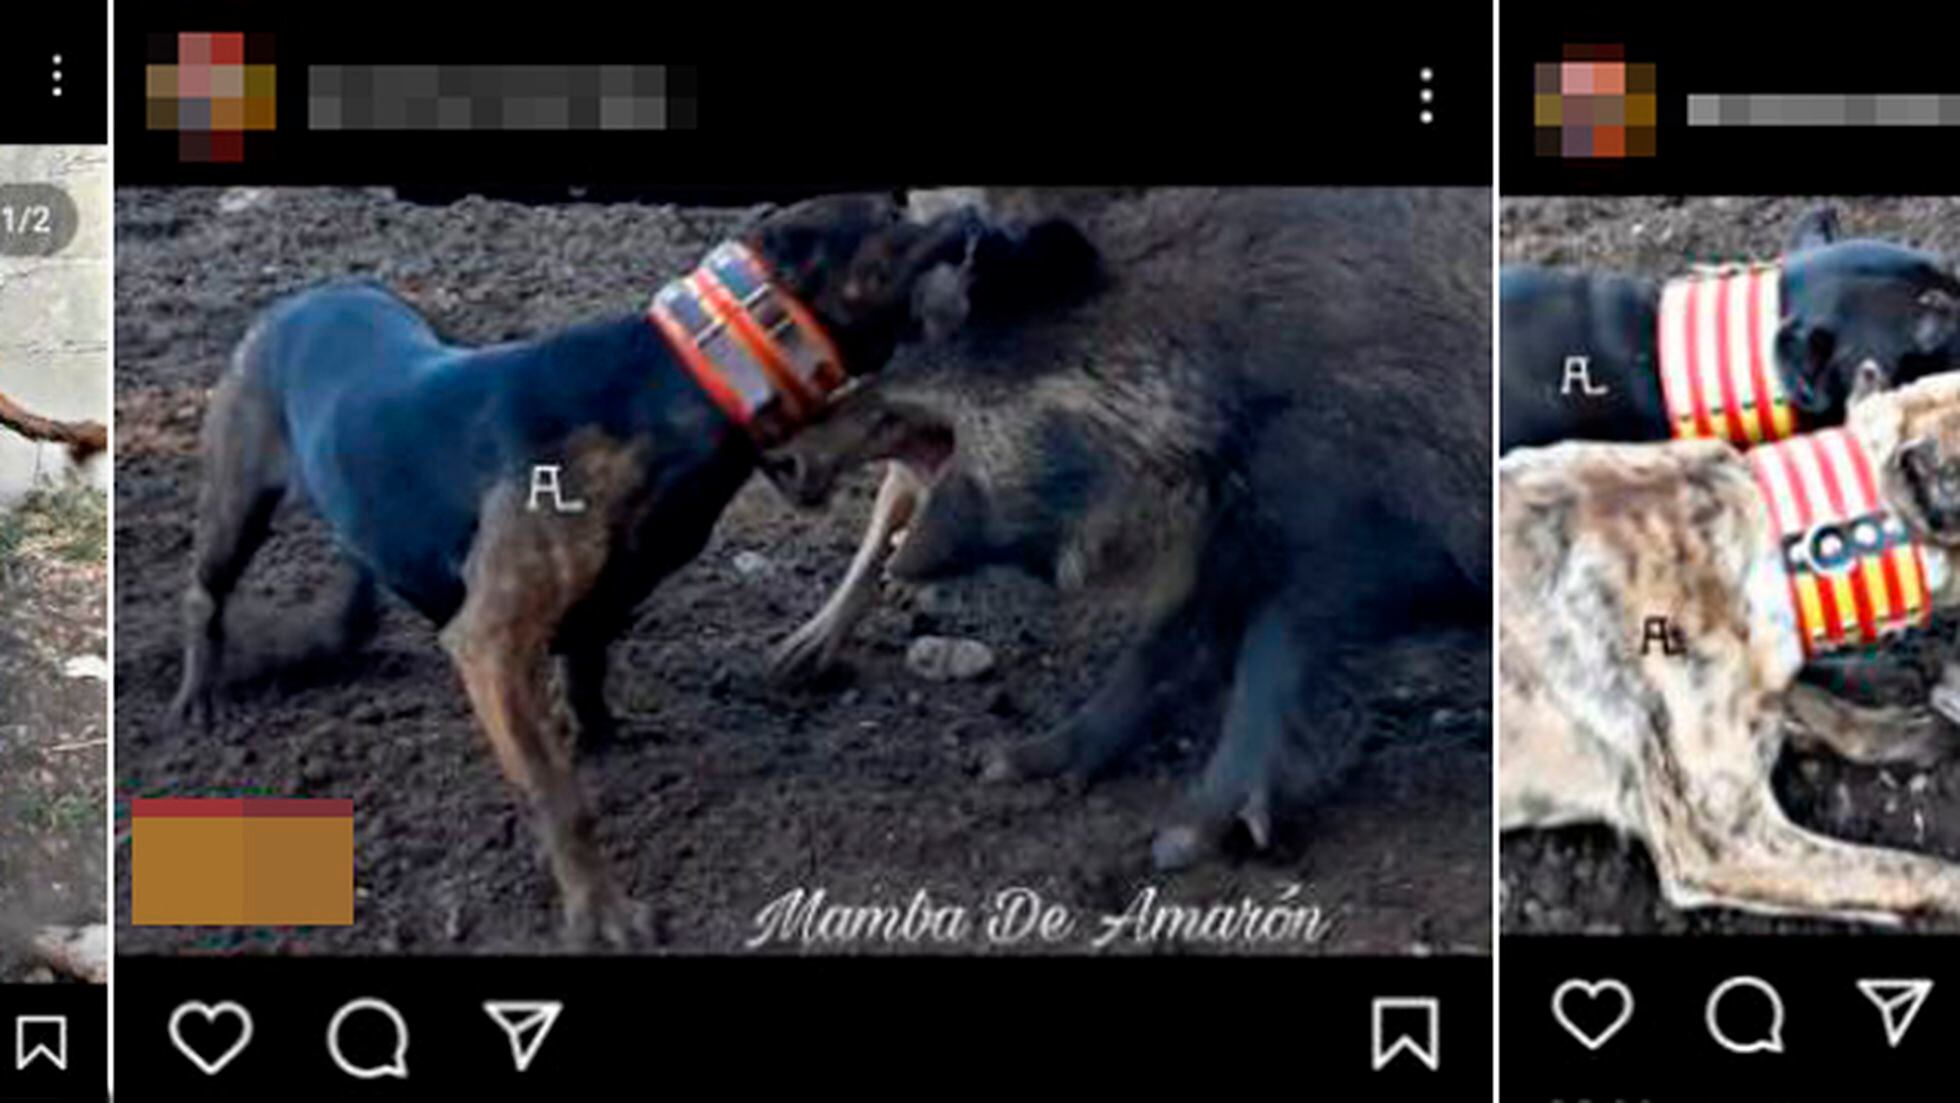 Animal abuse: Violence against animals running rampant on Instagram: 'There  is no control' | Society | EL PAÍS English Edition